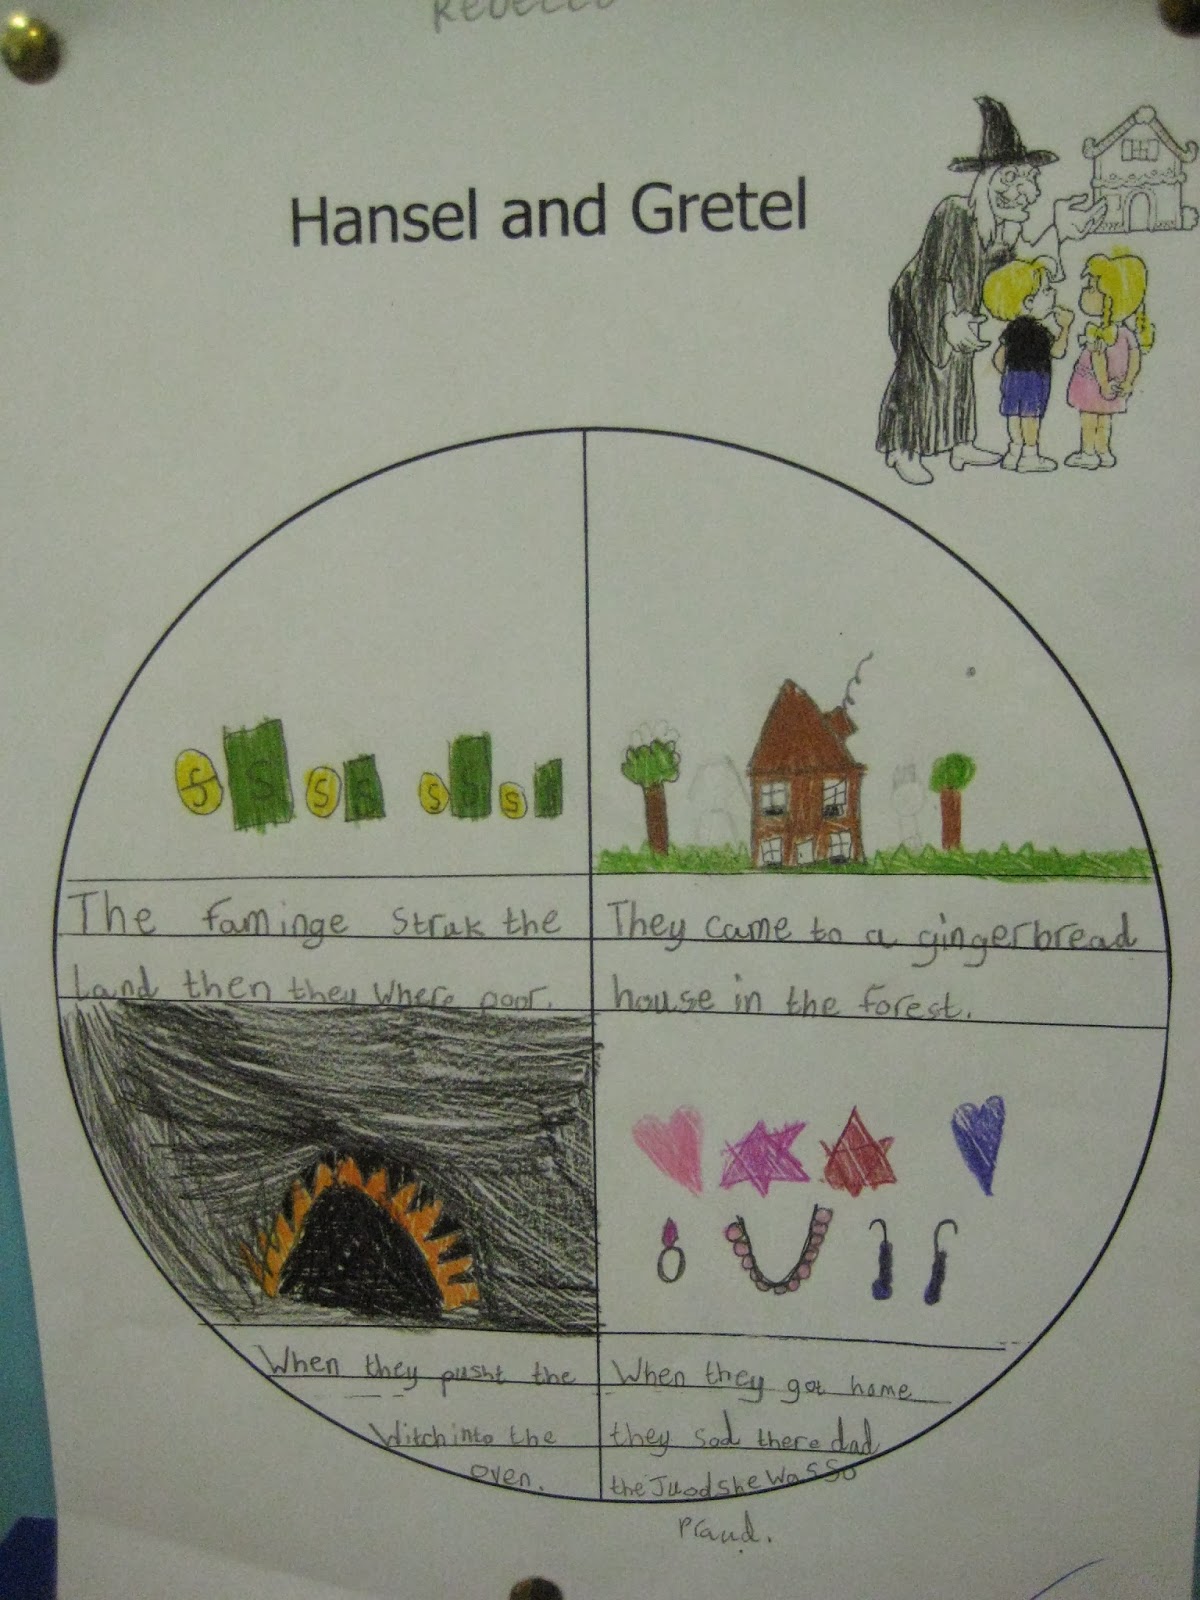 First Class Fun in Room Fourteen!: Hansel and Gretel1200 x 1600